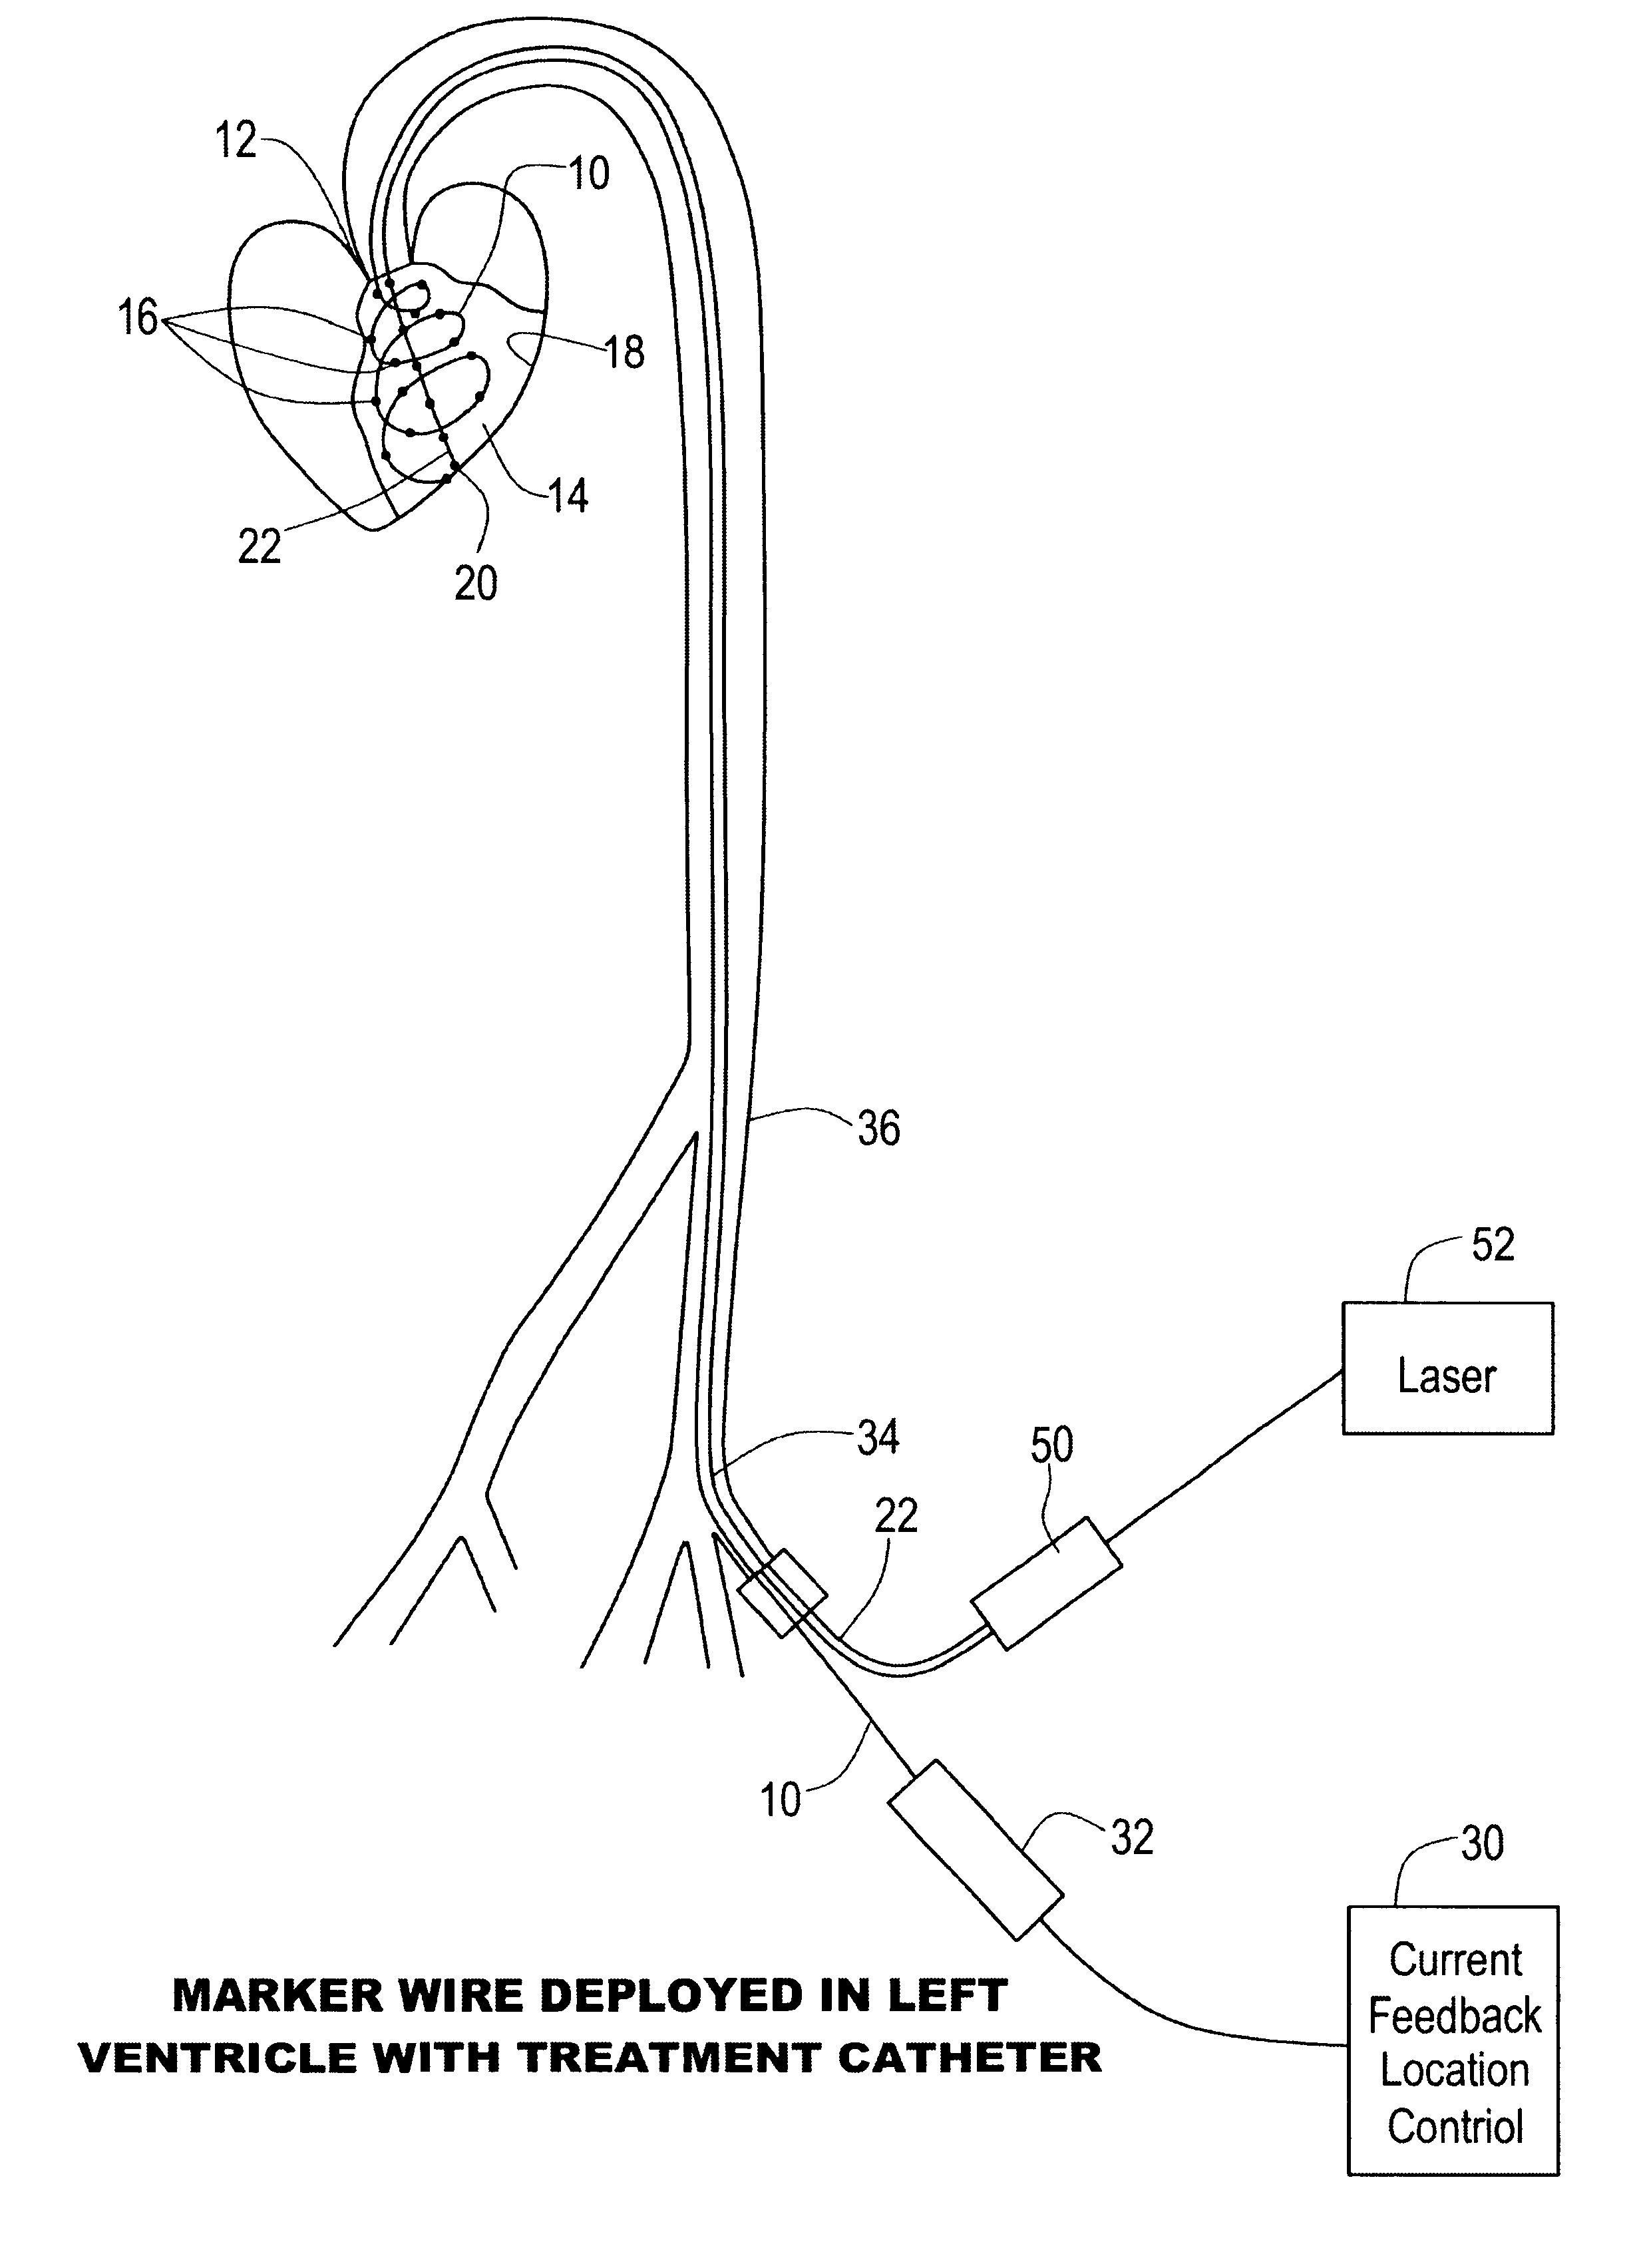 Percutaneous mapping system